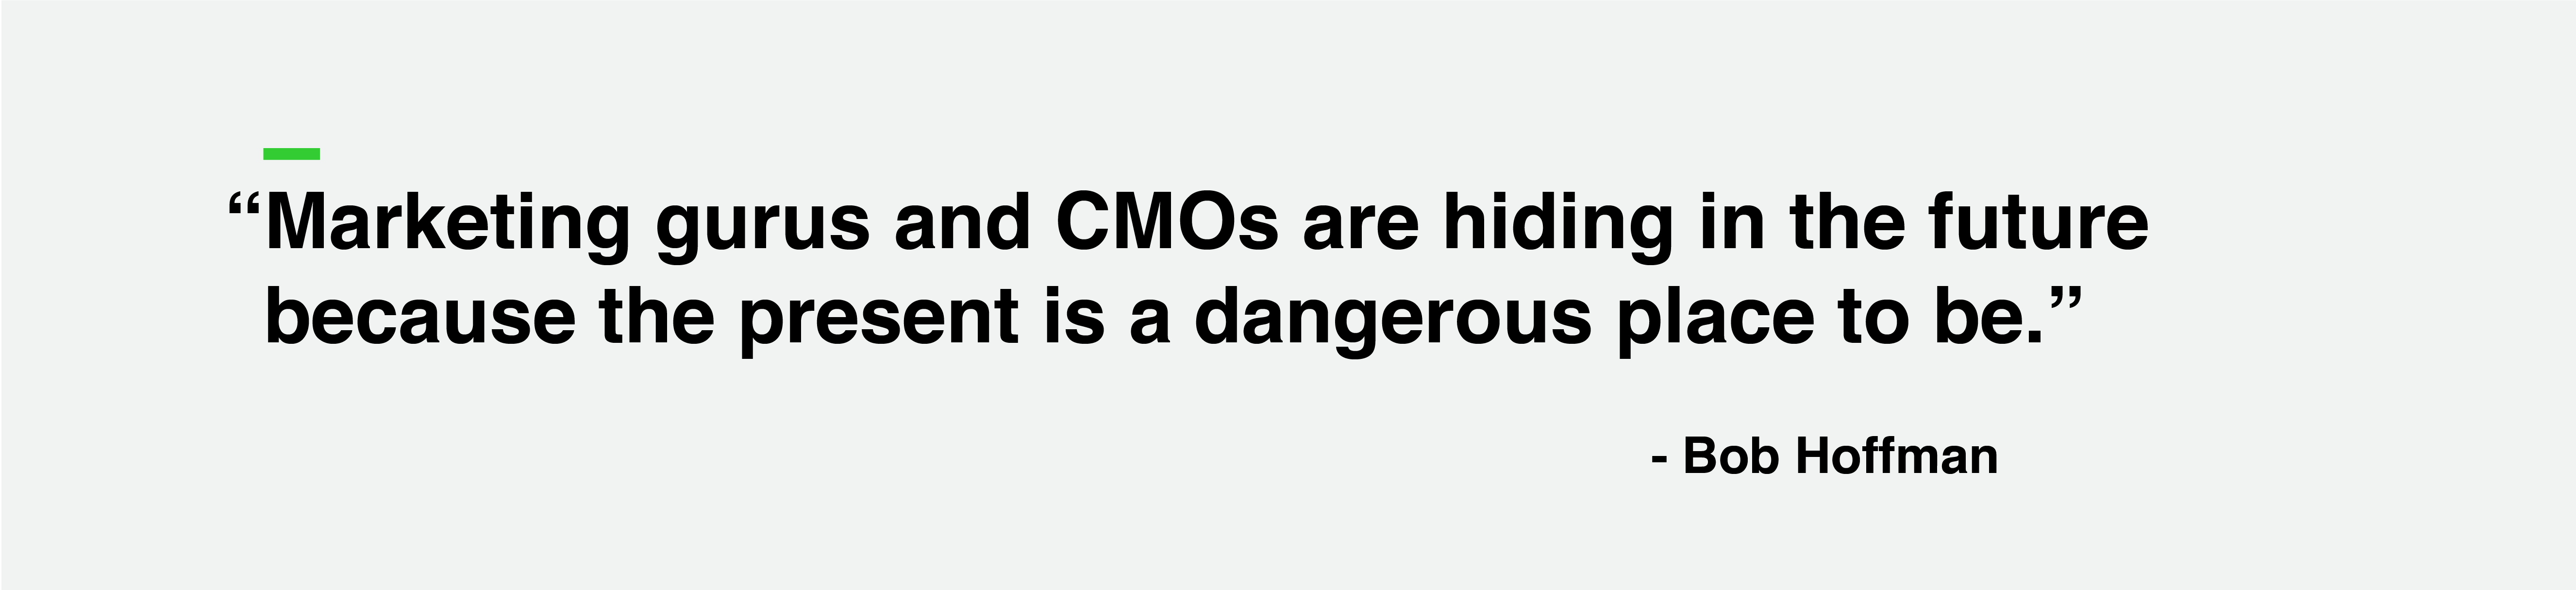 "Marketing gurus and CMOs are hiding in the future because the present is a dangerous place to be" - Bob Hoffman